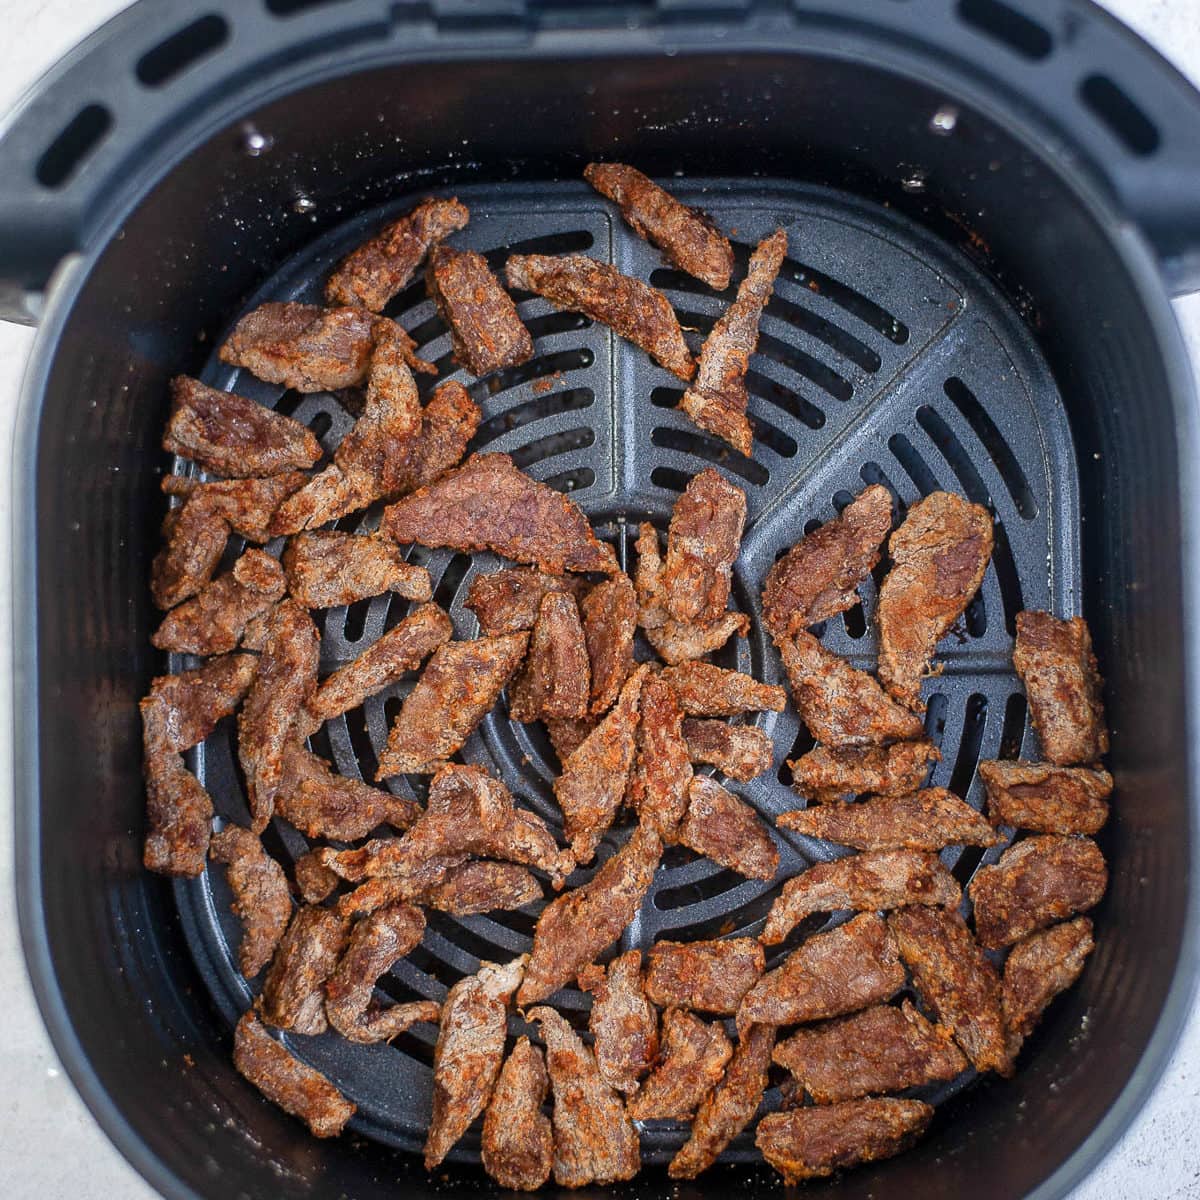 flank steak in air fryer after cooking